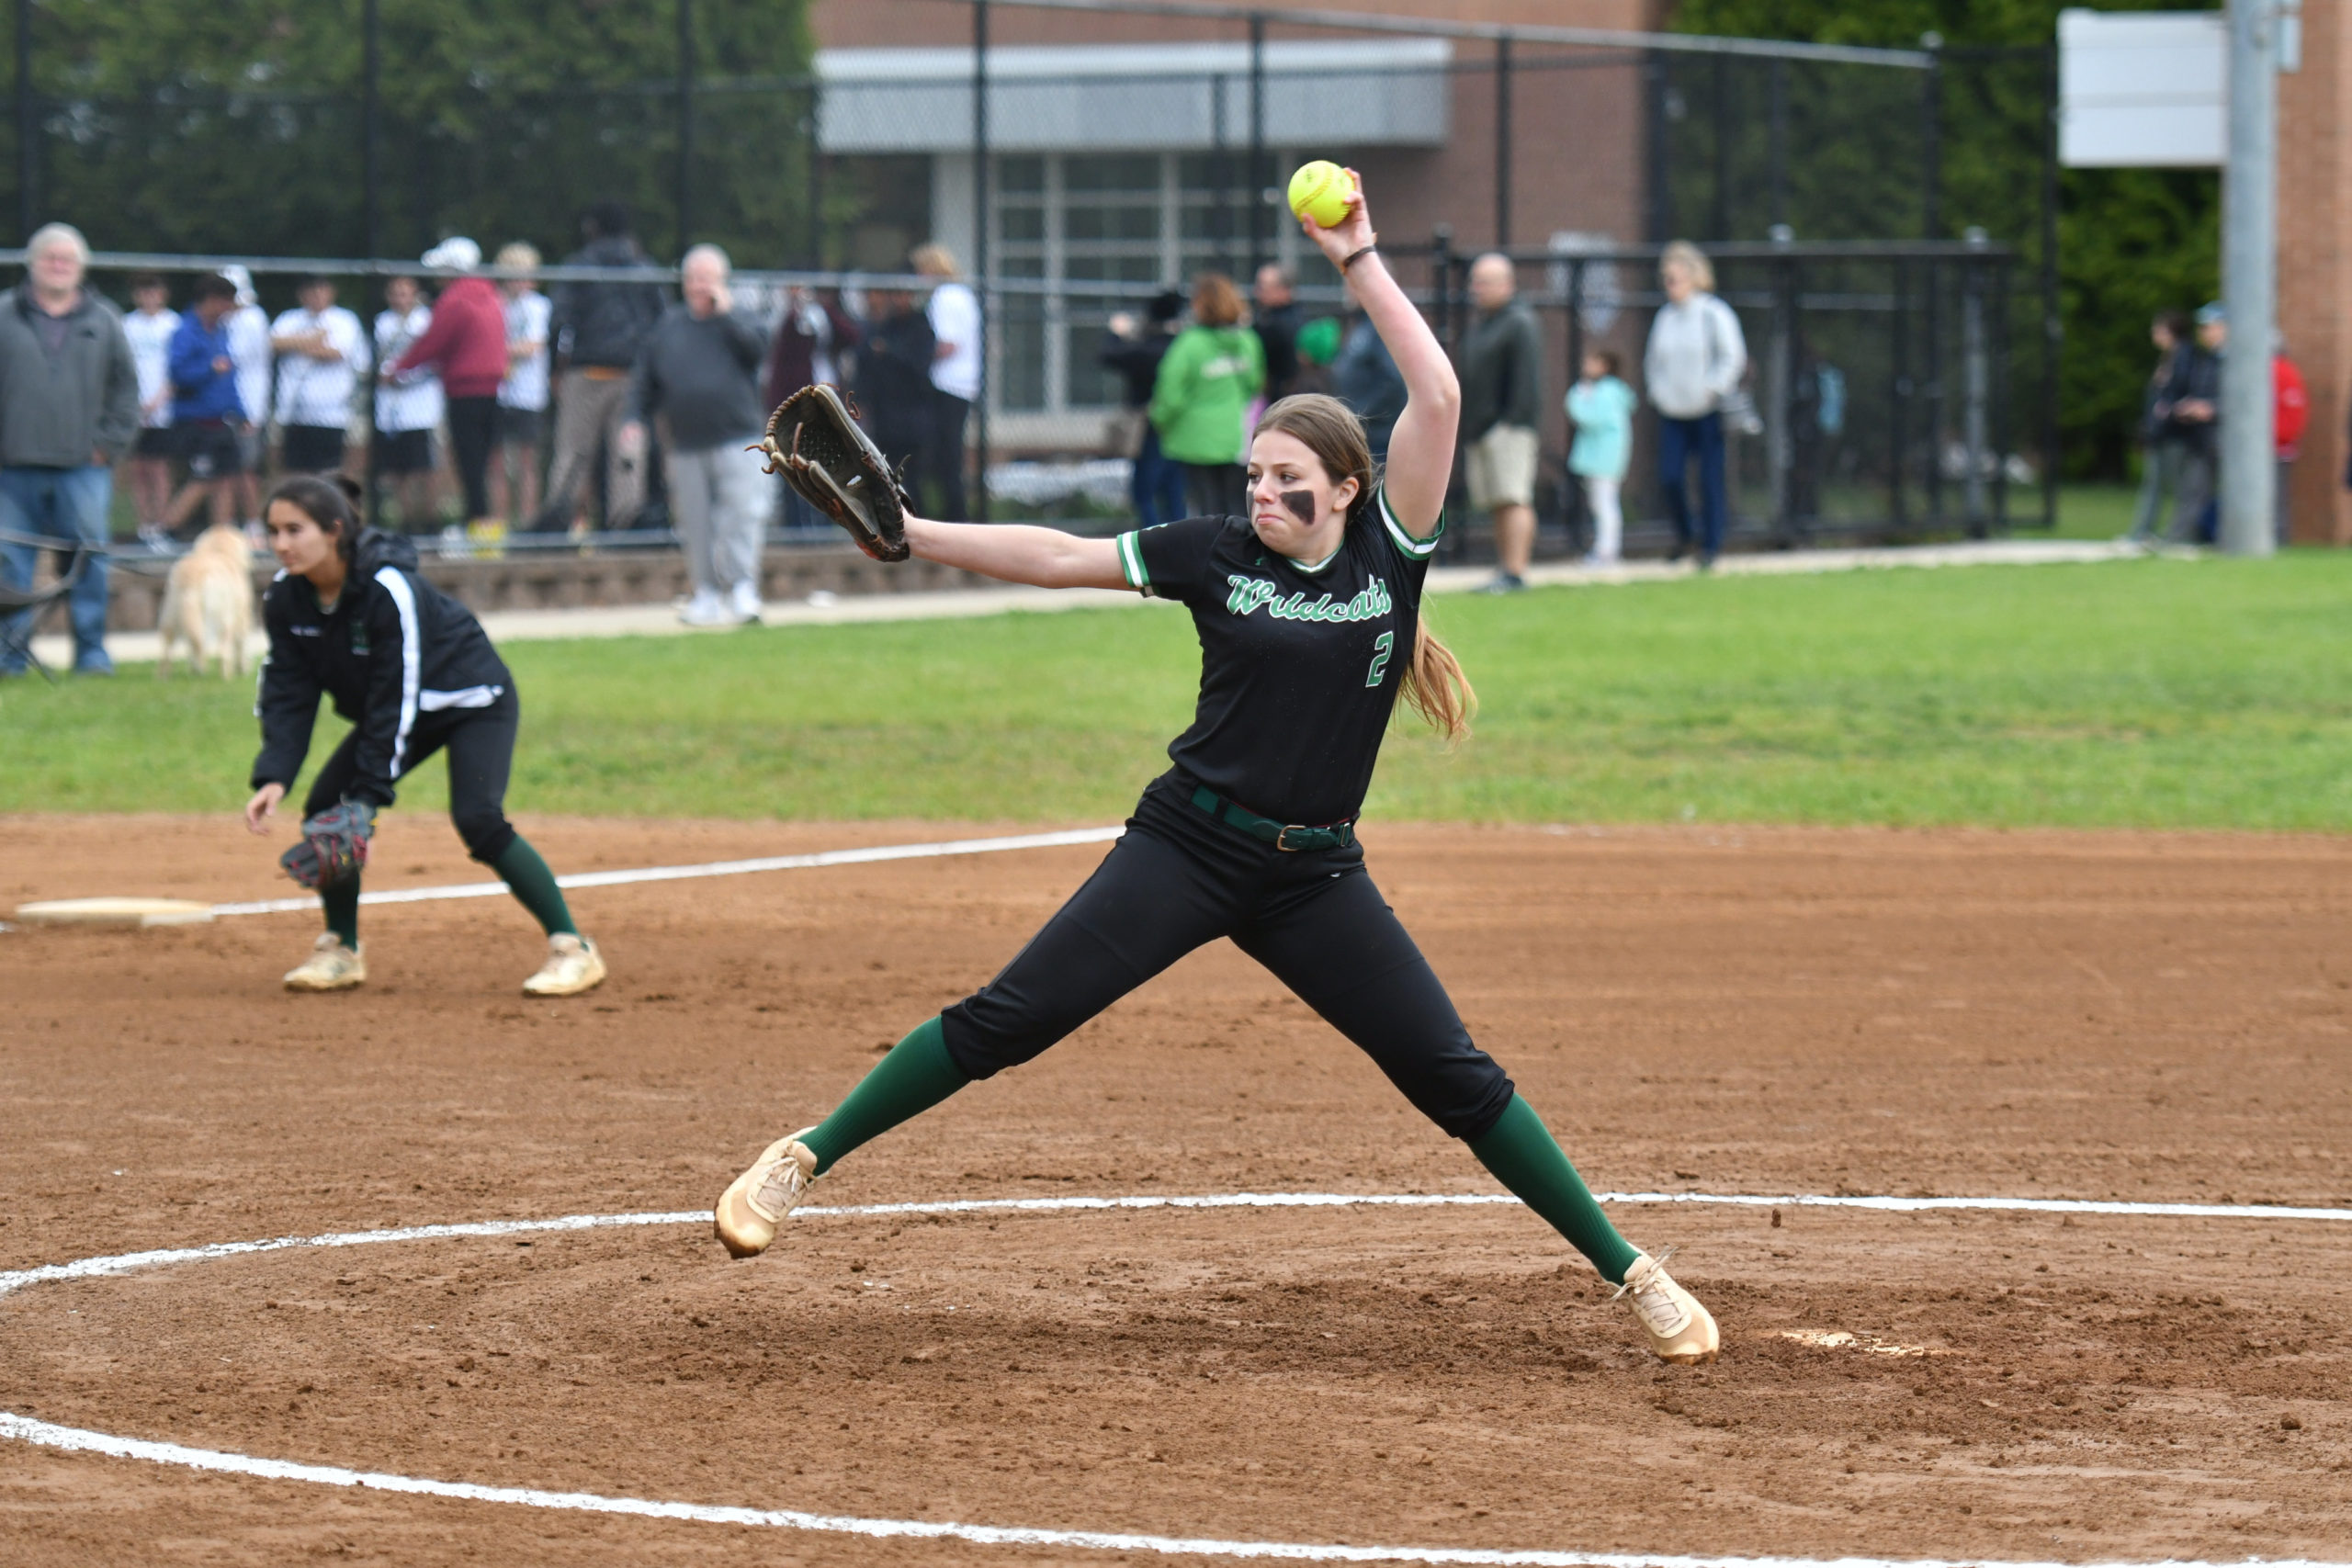 Starting pitcher junior Sami Rosenberg throws a pitch during the teams May 1 senior night game against Watkins Mill. Star pitching from four different pitchers led the team to a 17-0 no-hitter win.